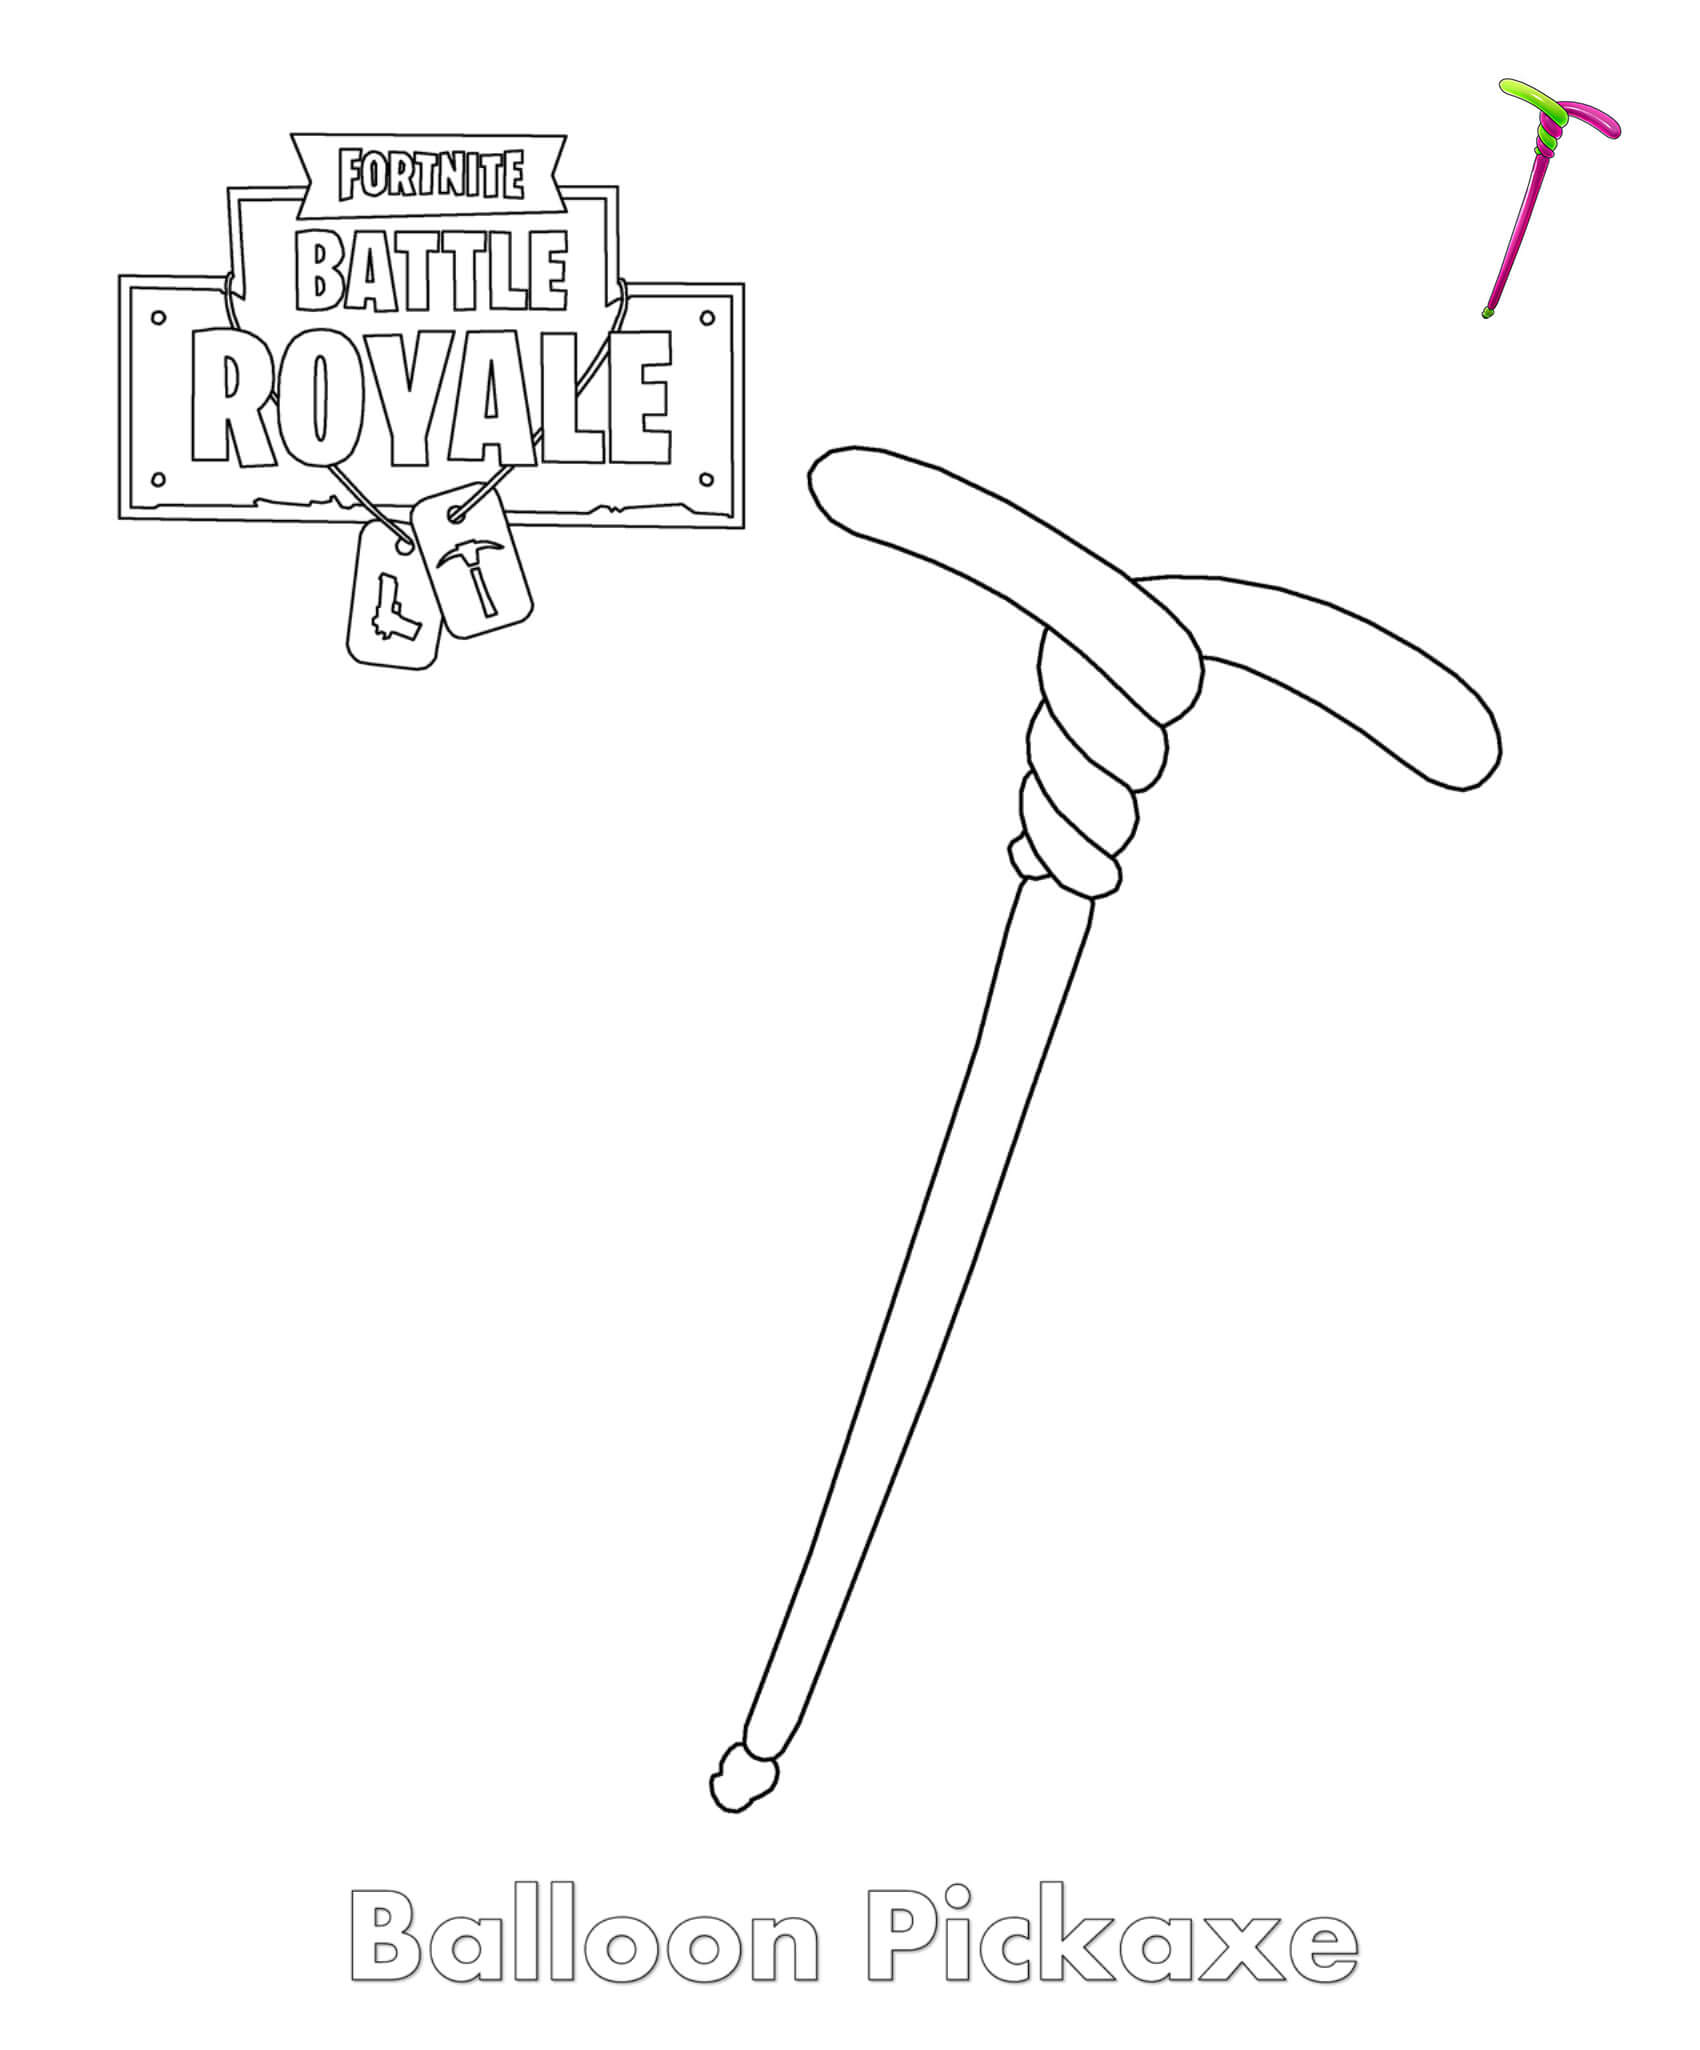 Fortnite Balloon Pickaxe Item Coloring Pages - Coloring Cool